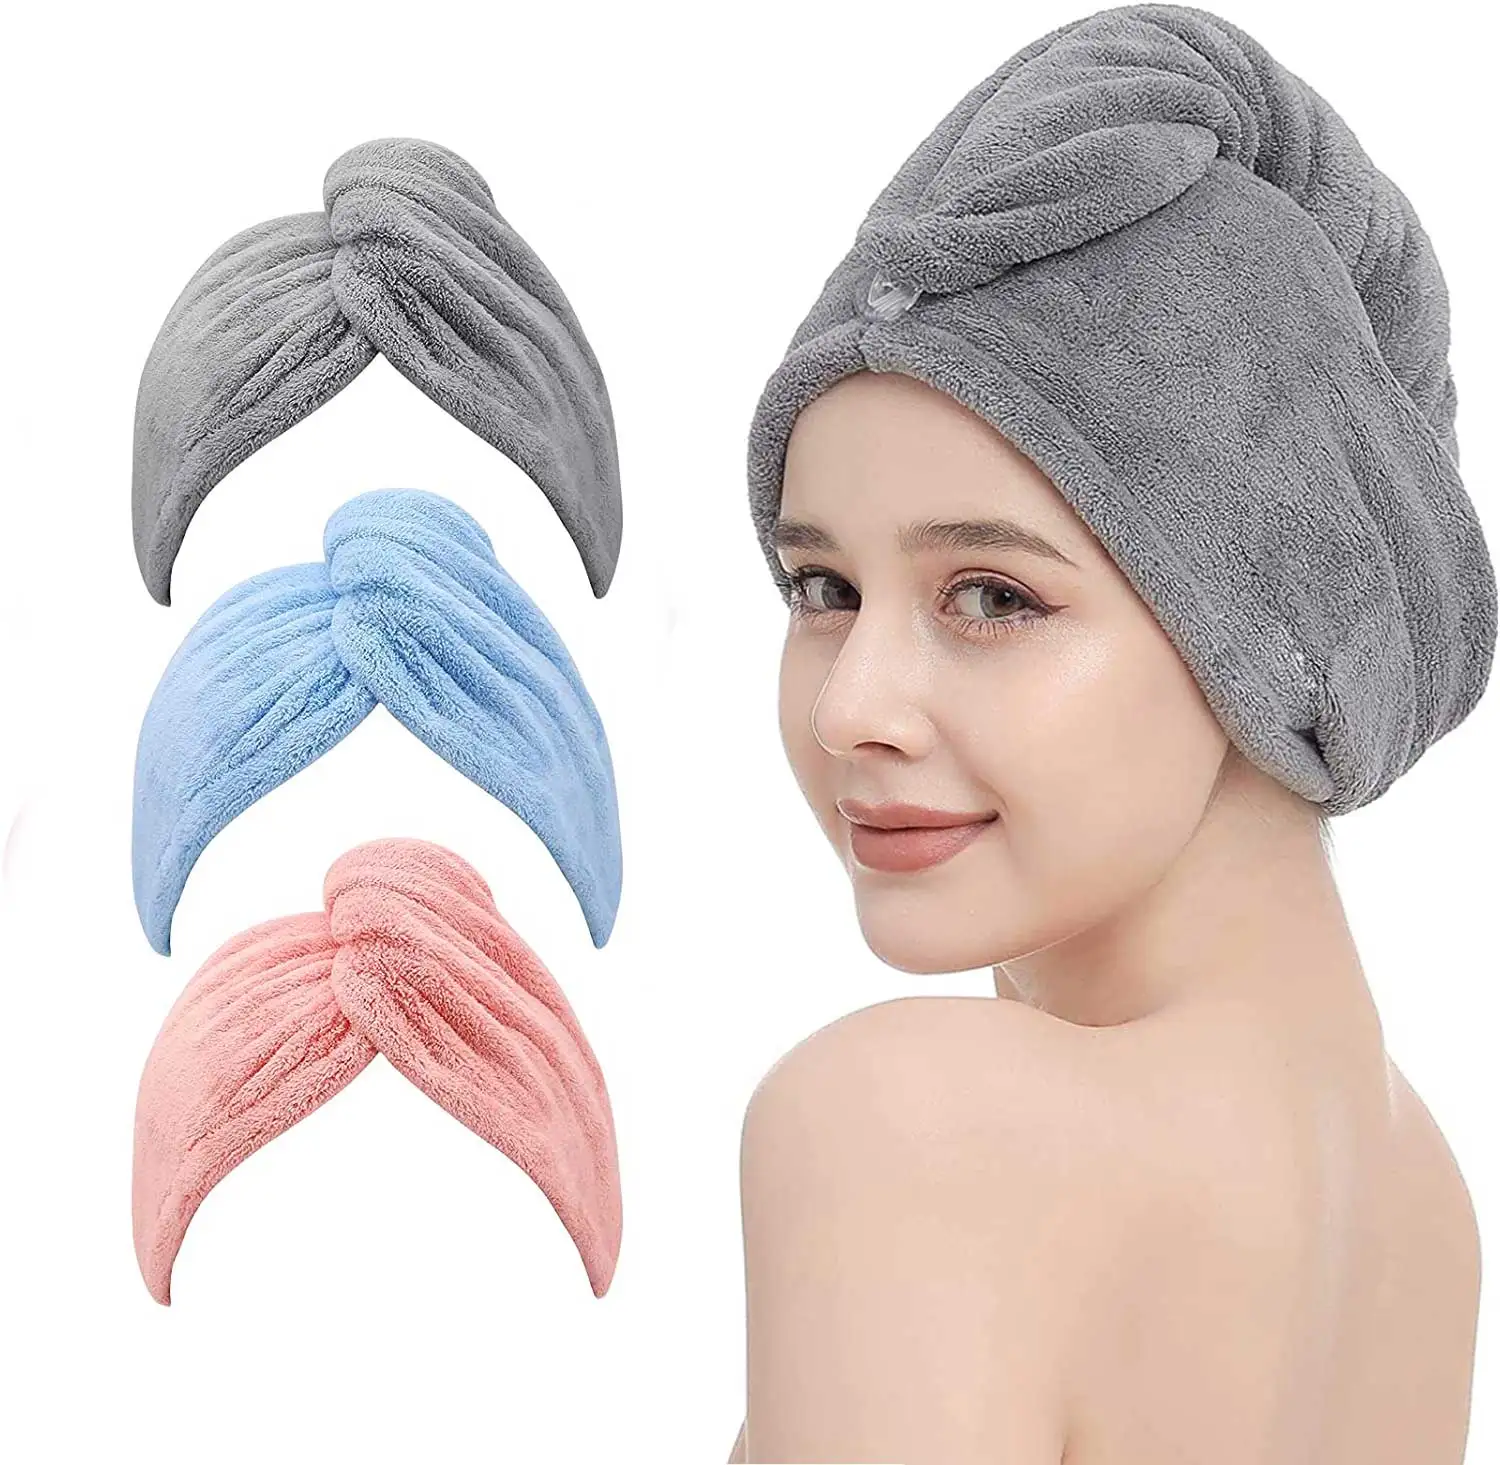 

Hair Hair Hair, Turban Towels Wrap Ultra Soft, Fast Wet Drying Wrap Women Curly Absorbent, No Hair Microfiber Frizz Towel For